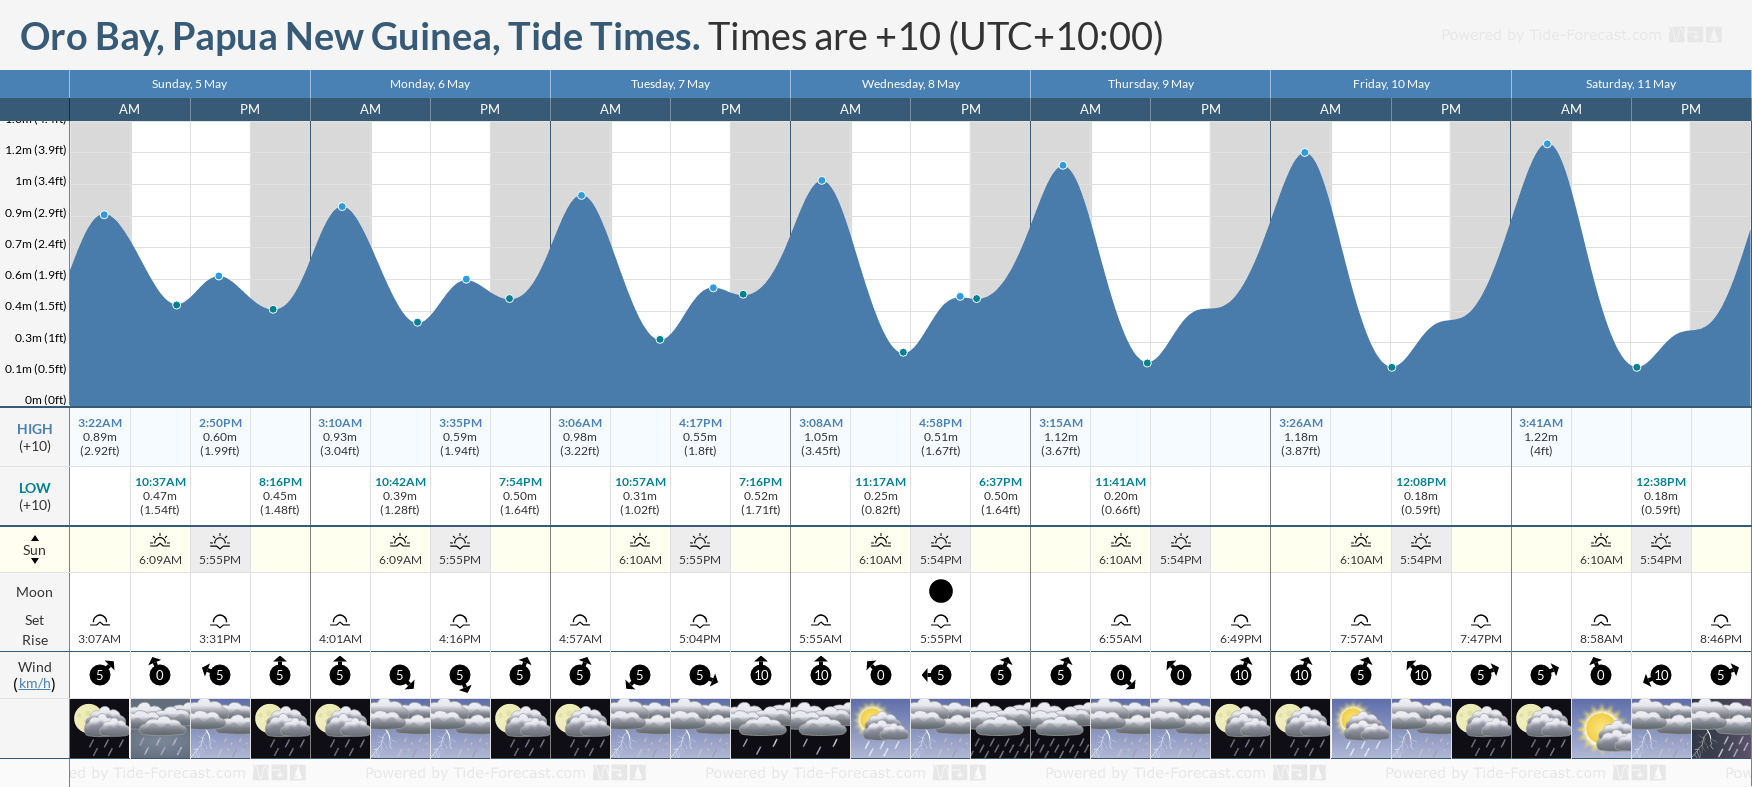 Oro Bay, Papua New Guinea Tide Chart including high and low tide tide times for the next 7 days